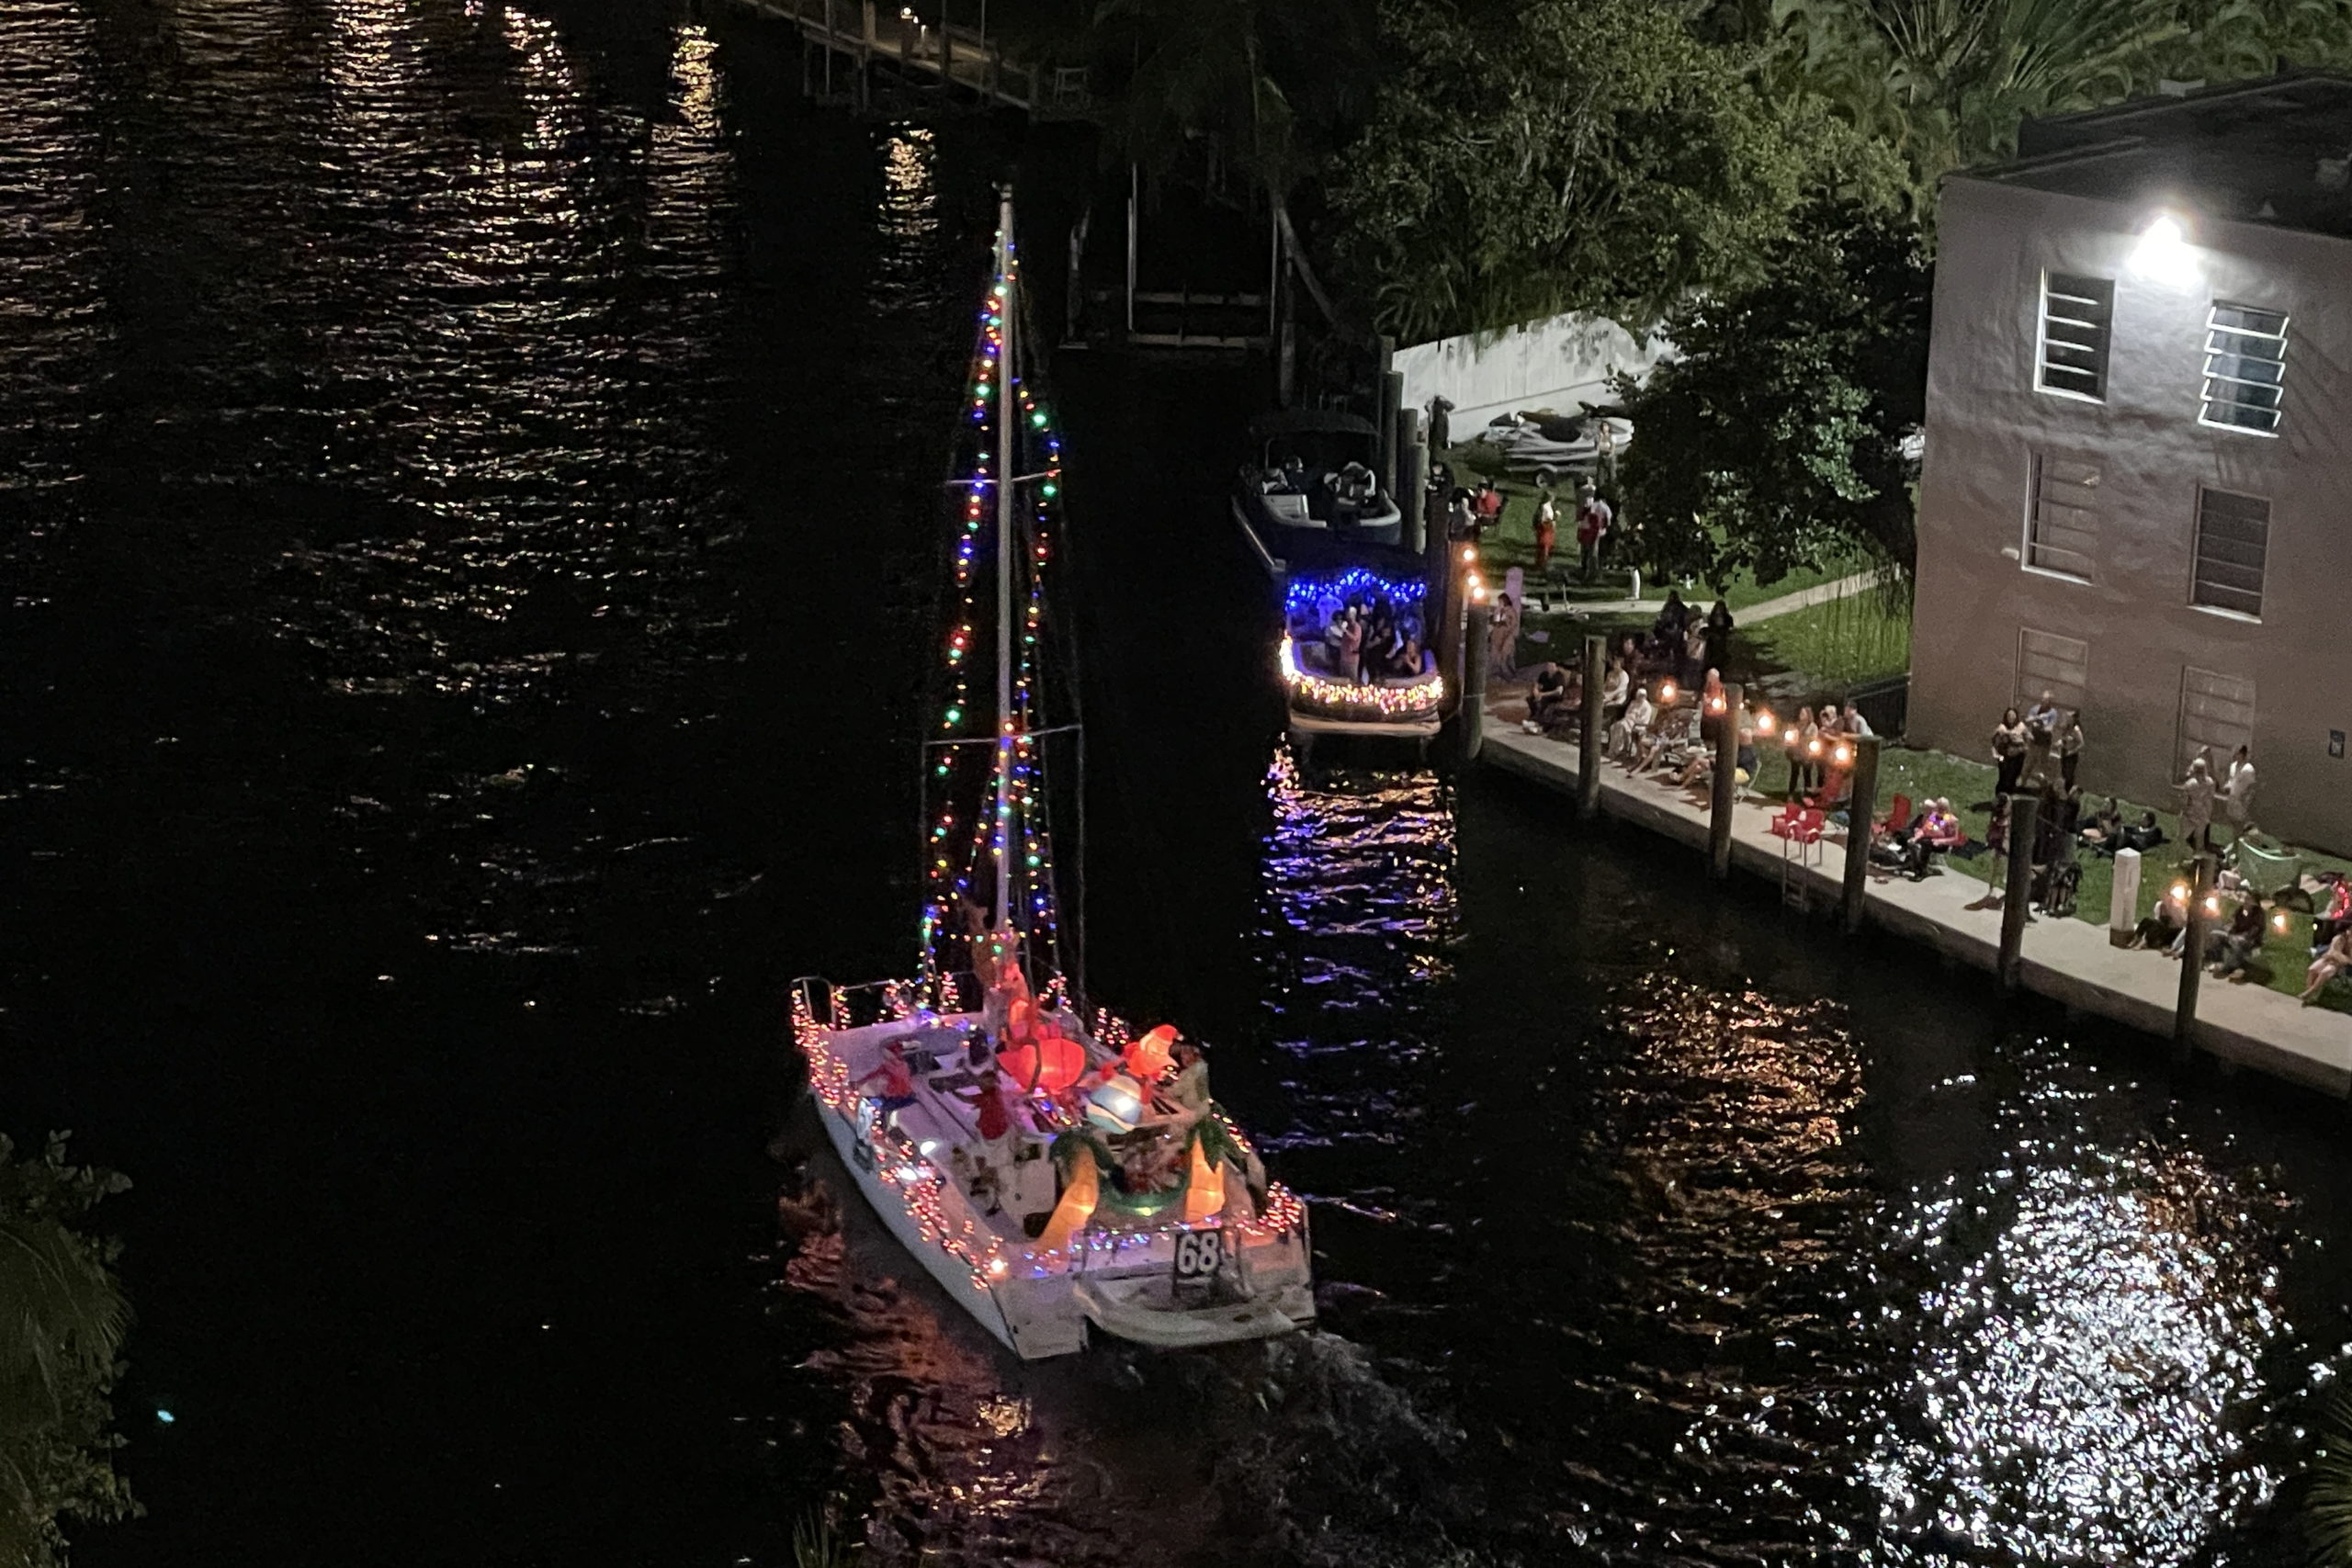 Aireze, boat number 68 in the 2022 Winterfest Boat Parade